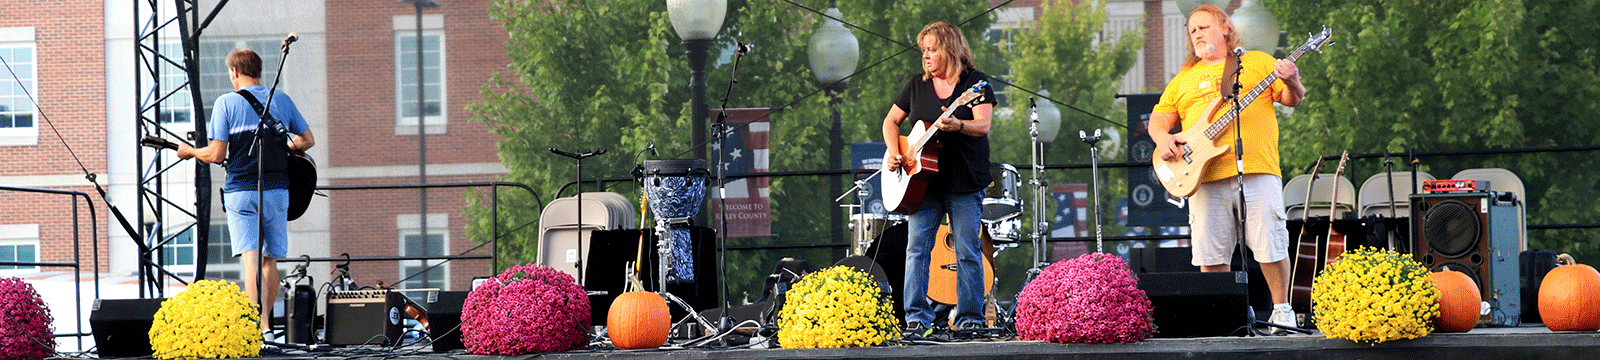 Hippie Fingers band playing on the Versailles Pumpkin Show stage in Versaille, Indiana.